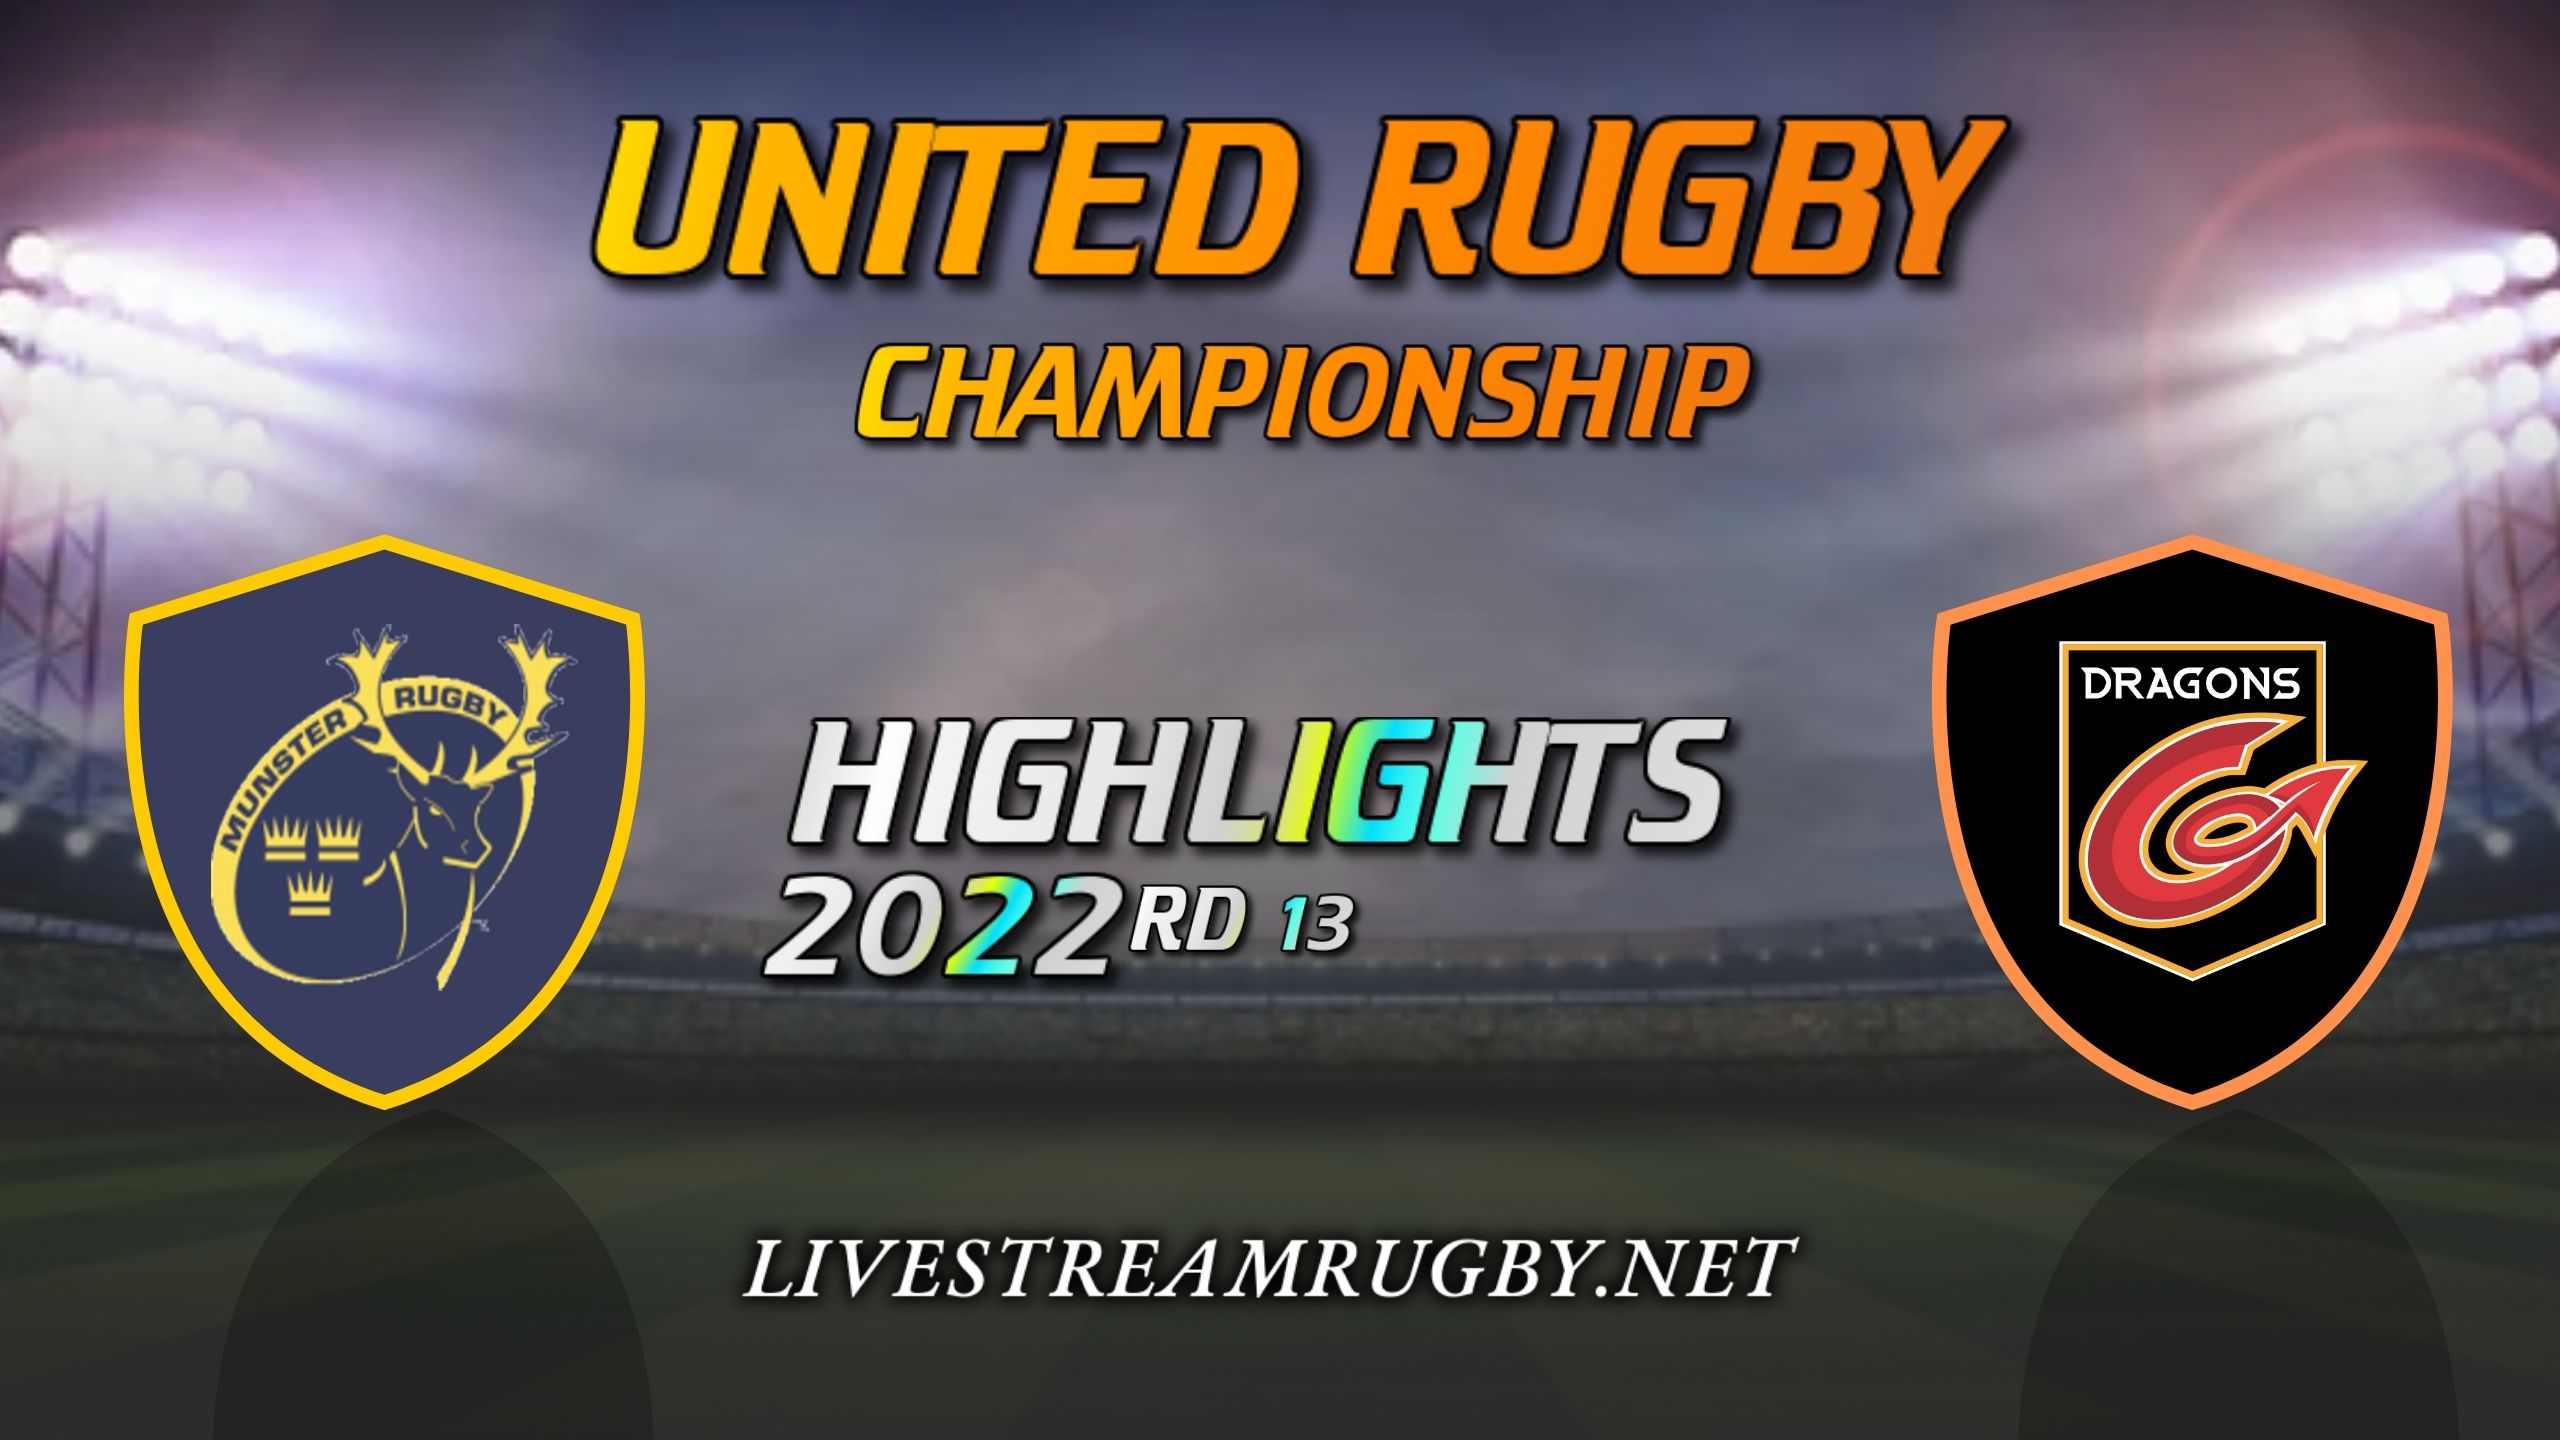 Munster Vs Dragons Highlights 2022 Rd 13 United Rugby